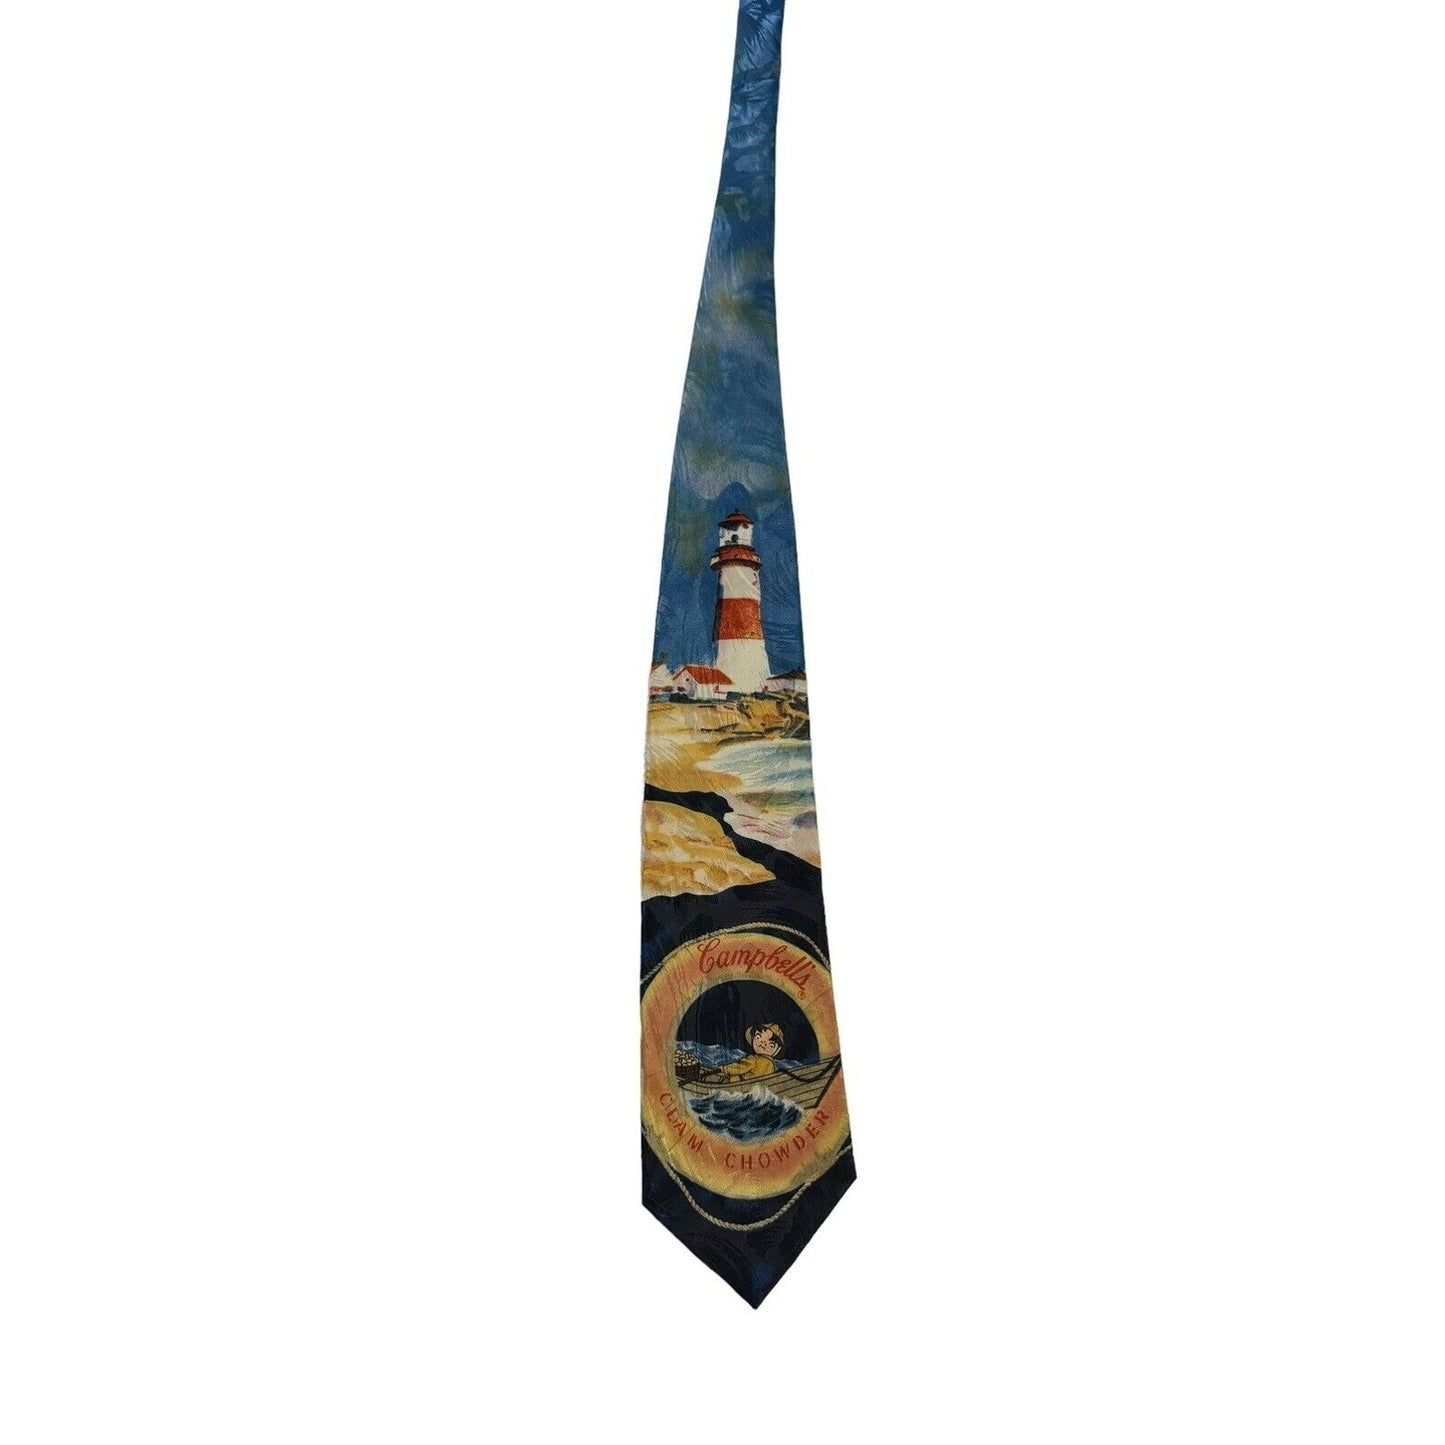 Campbell’s Soup Clam Chowder Life Preserver Lighthouse Nautical Vintage Necktie